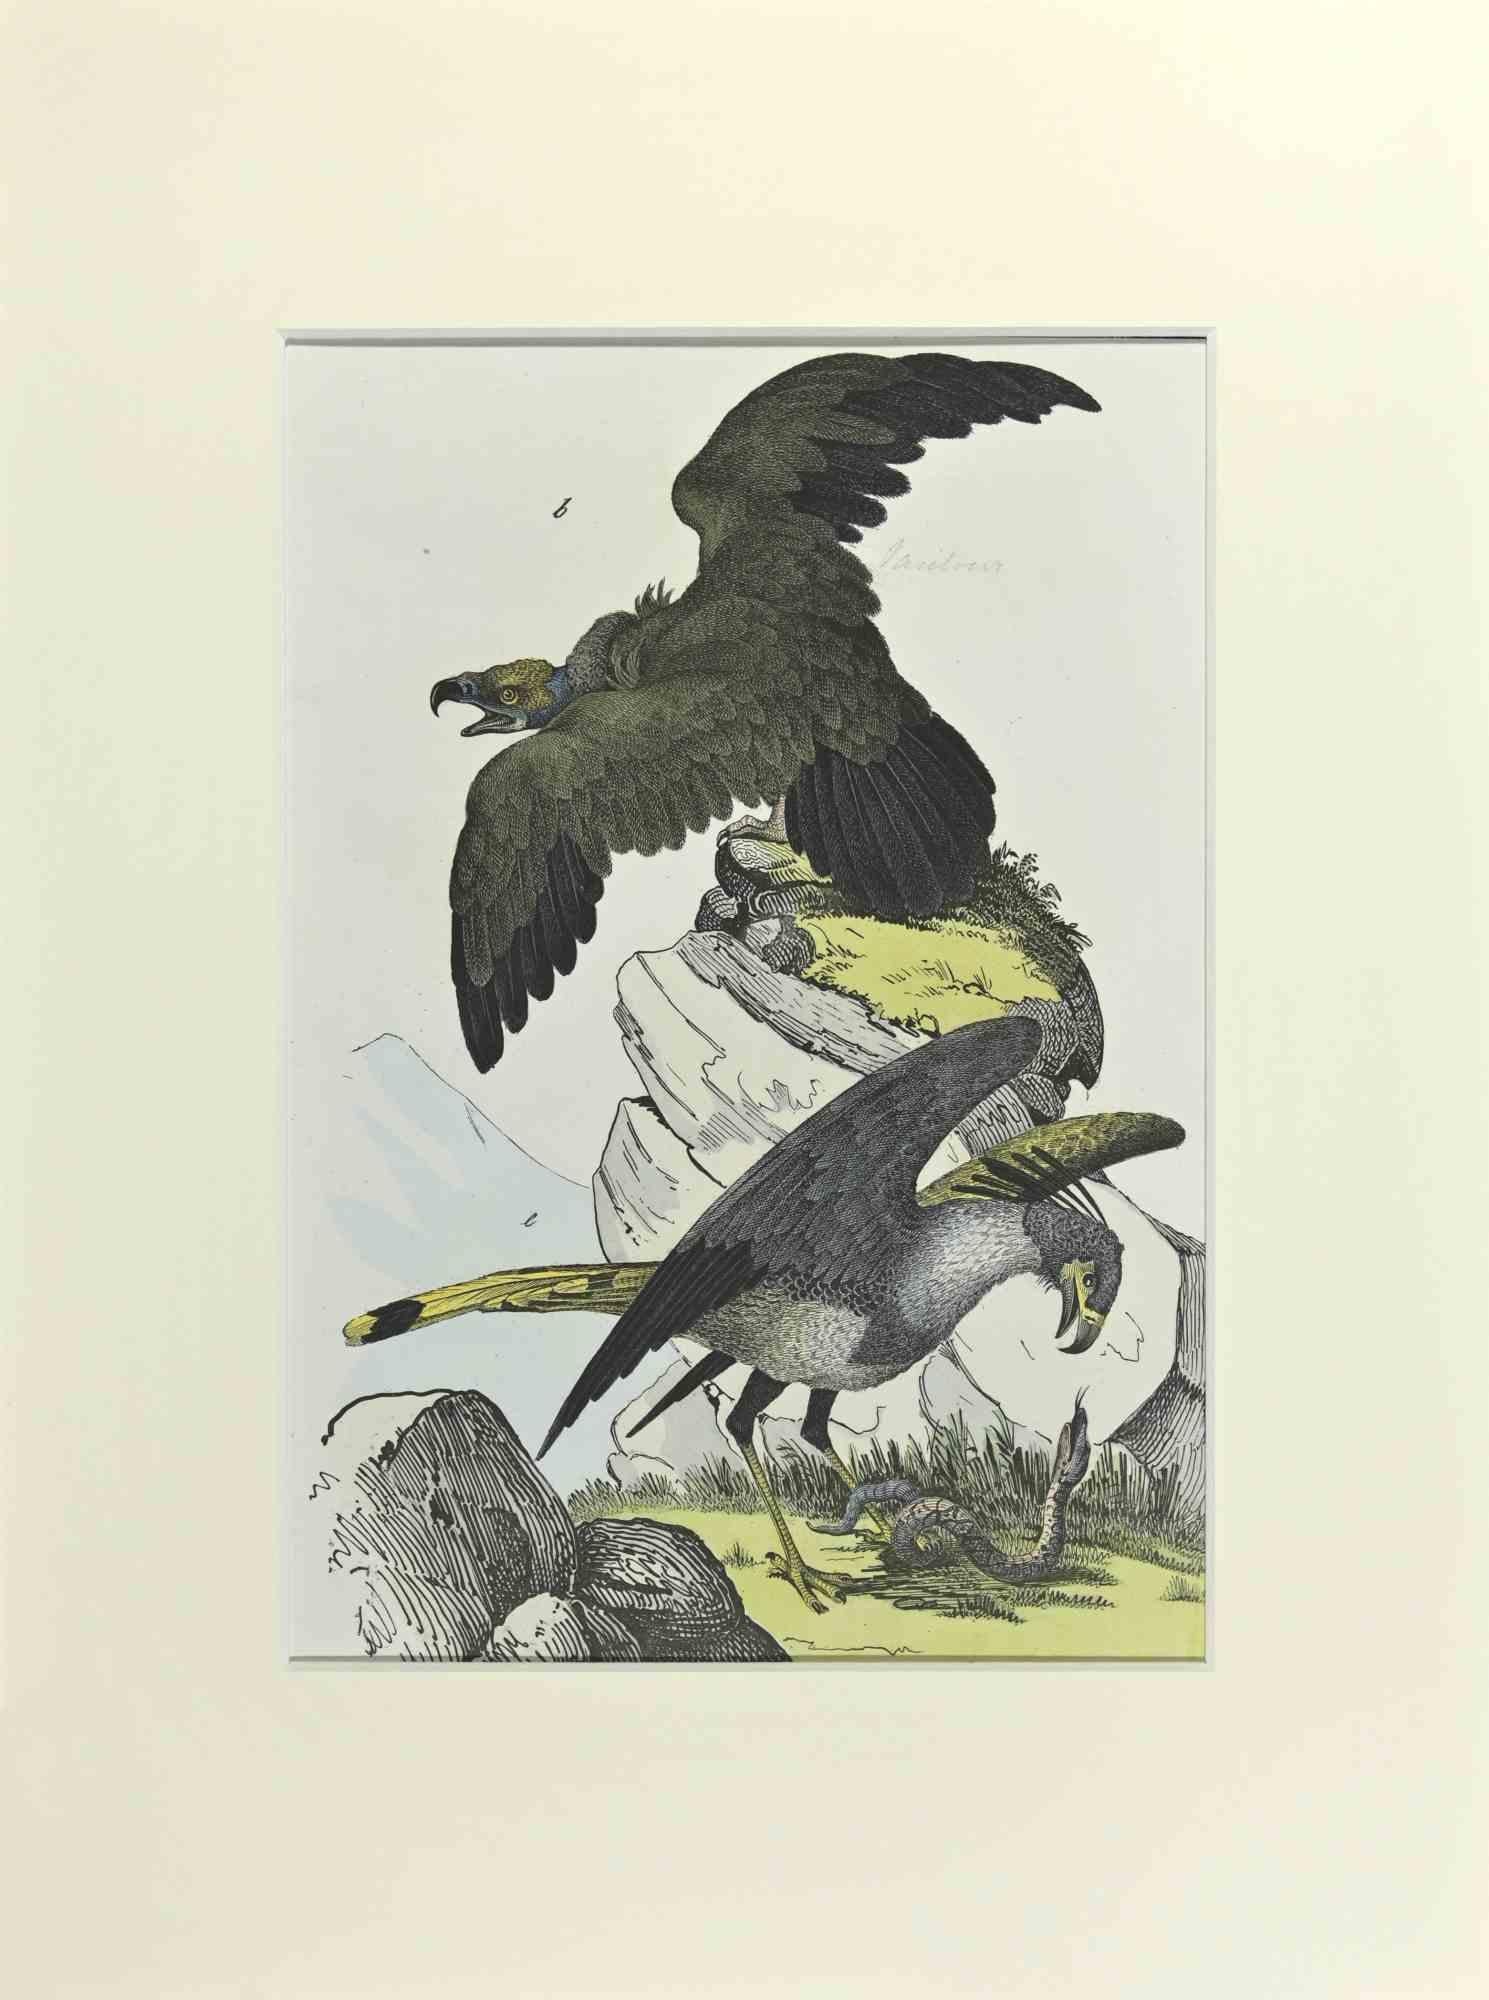 Eagles is an etching hand colored realized by Gotthilf Heinrich von Schubert - Johann Friedrich Naumann, Illustration from Natural history of birds in pictures, published by Stuttgart and Esslingen, Schreiber and Schill 1840 ca. 

Illustration